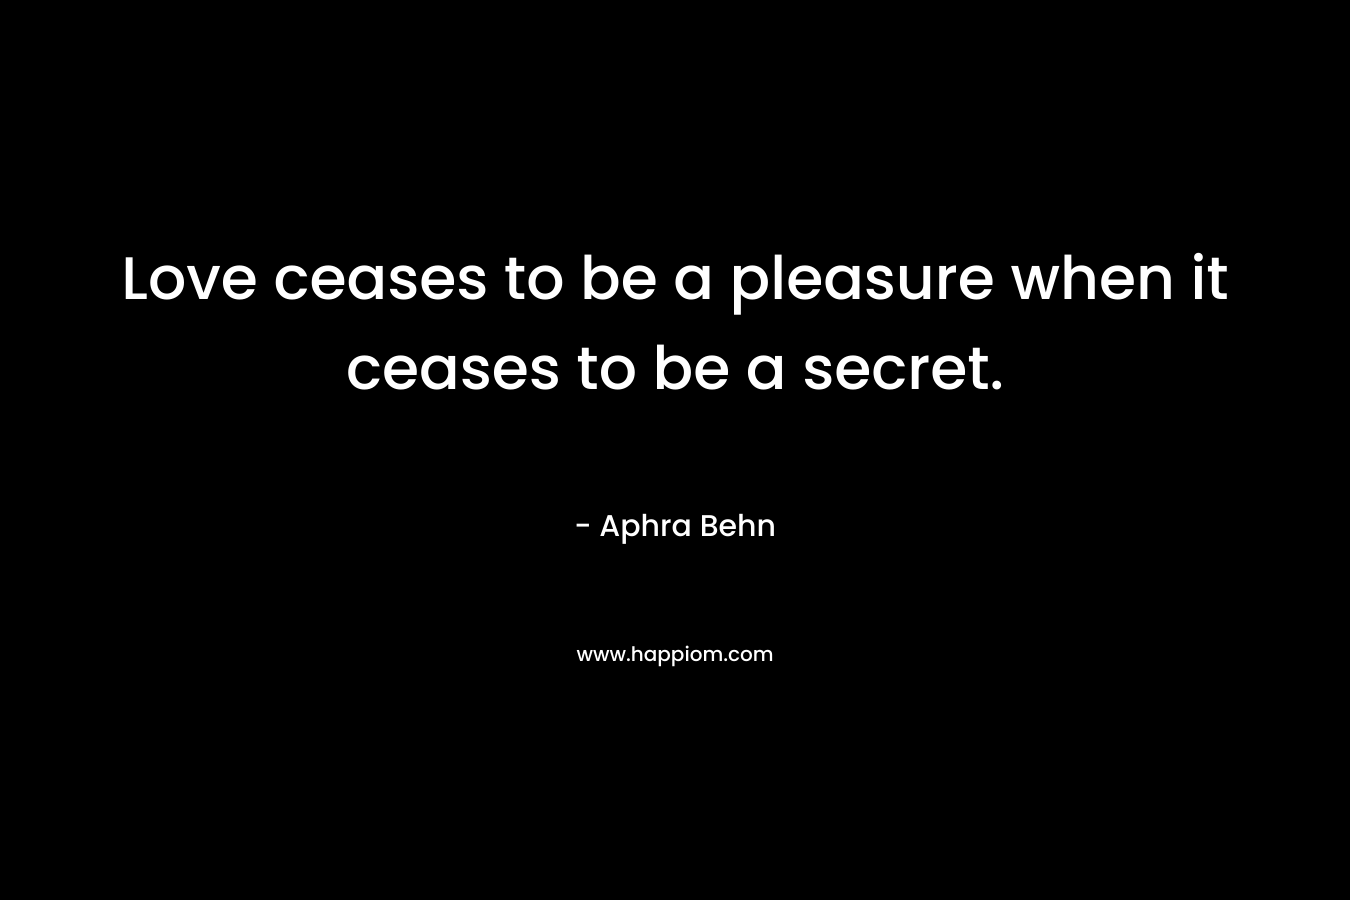 Love ceases to be a pleasure when it ceases to be a secret.